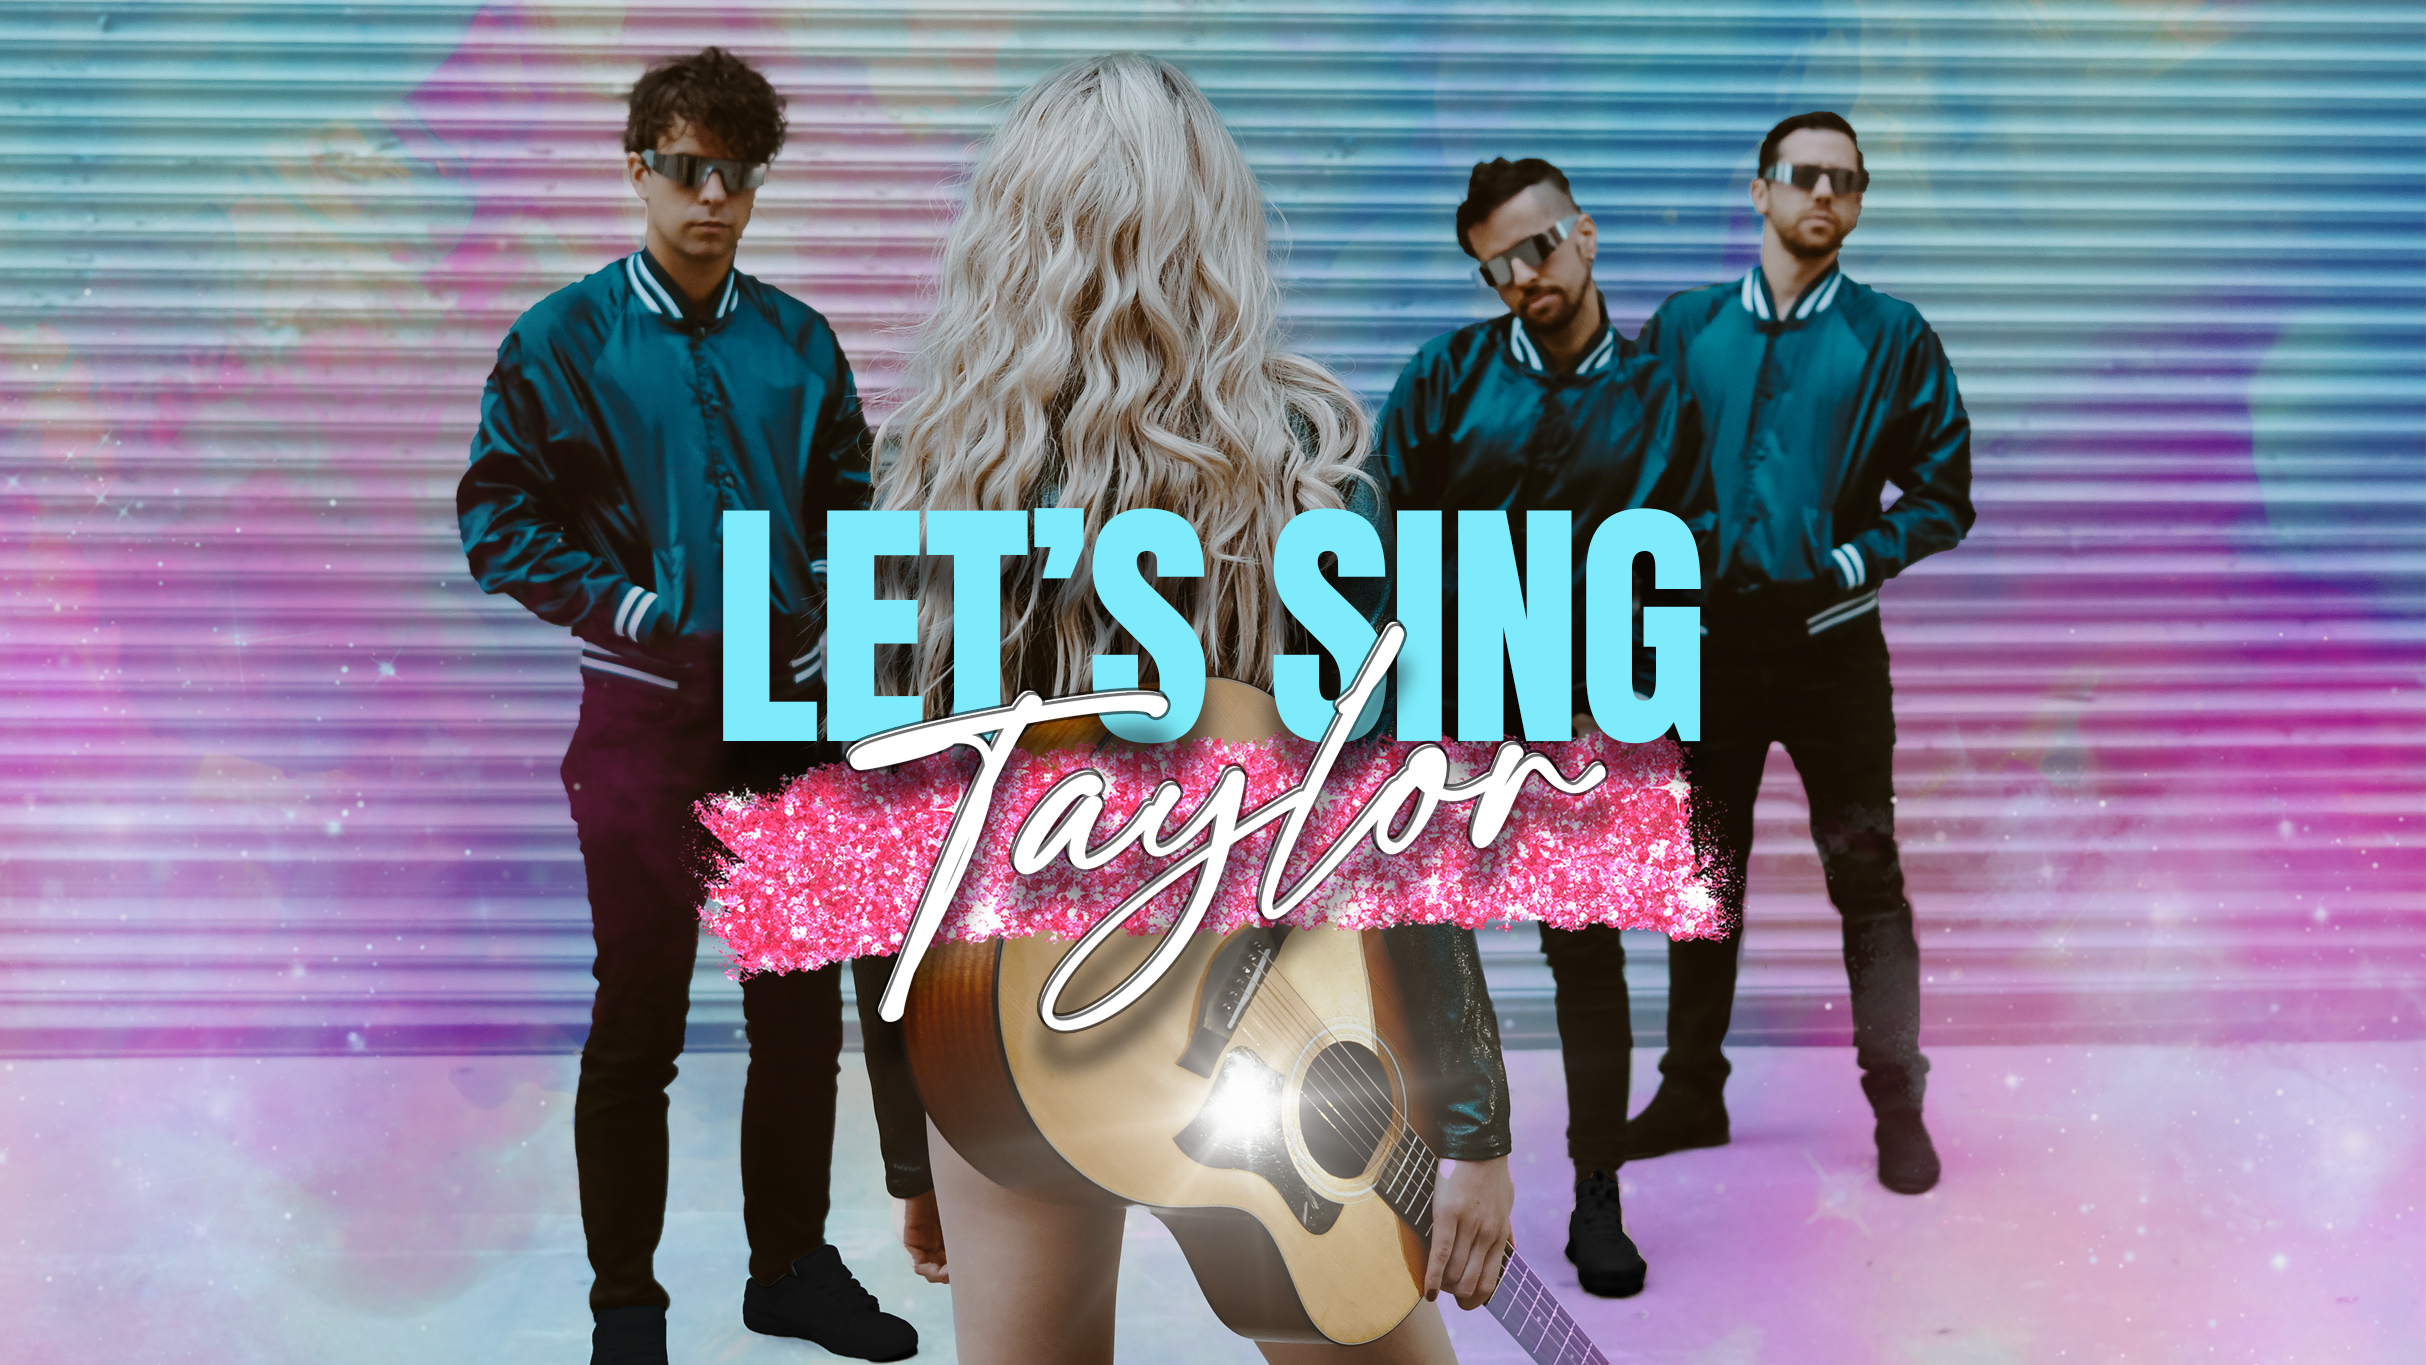 Let&rsquo;s Sing Taylor - A Live Band Experience Celebrating Taylor Swift presale information on freepresalepasswords.com